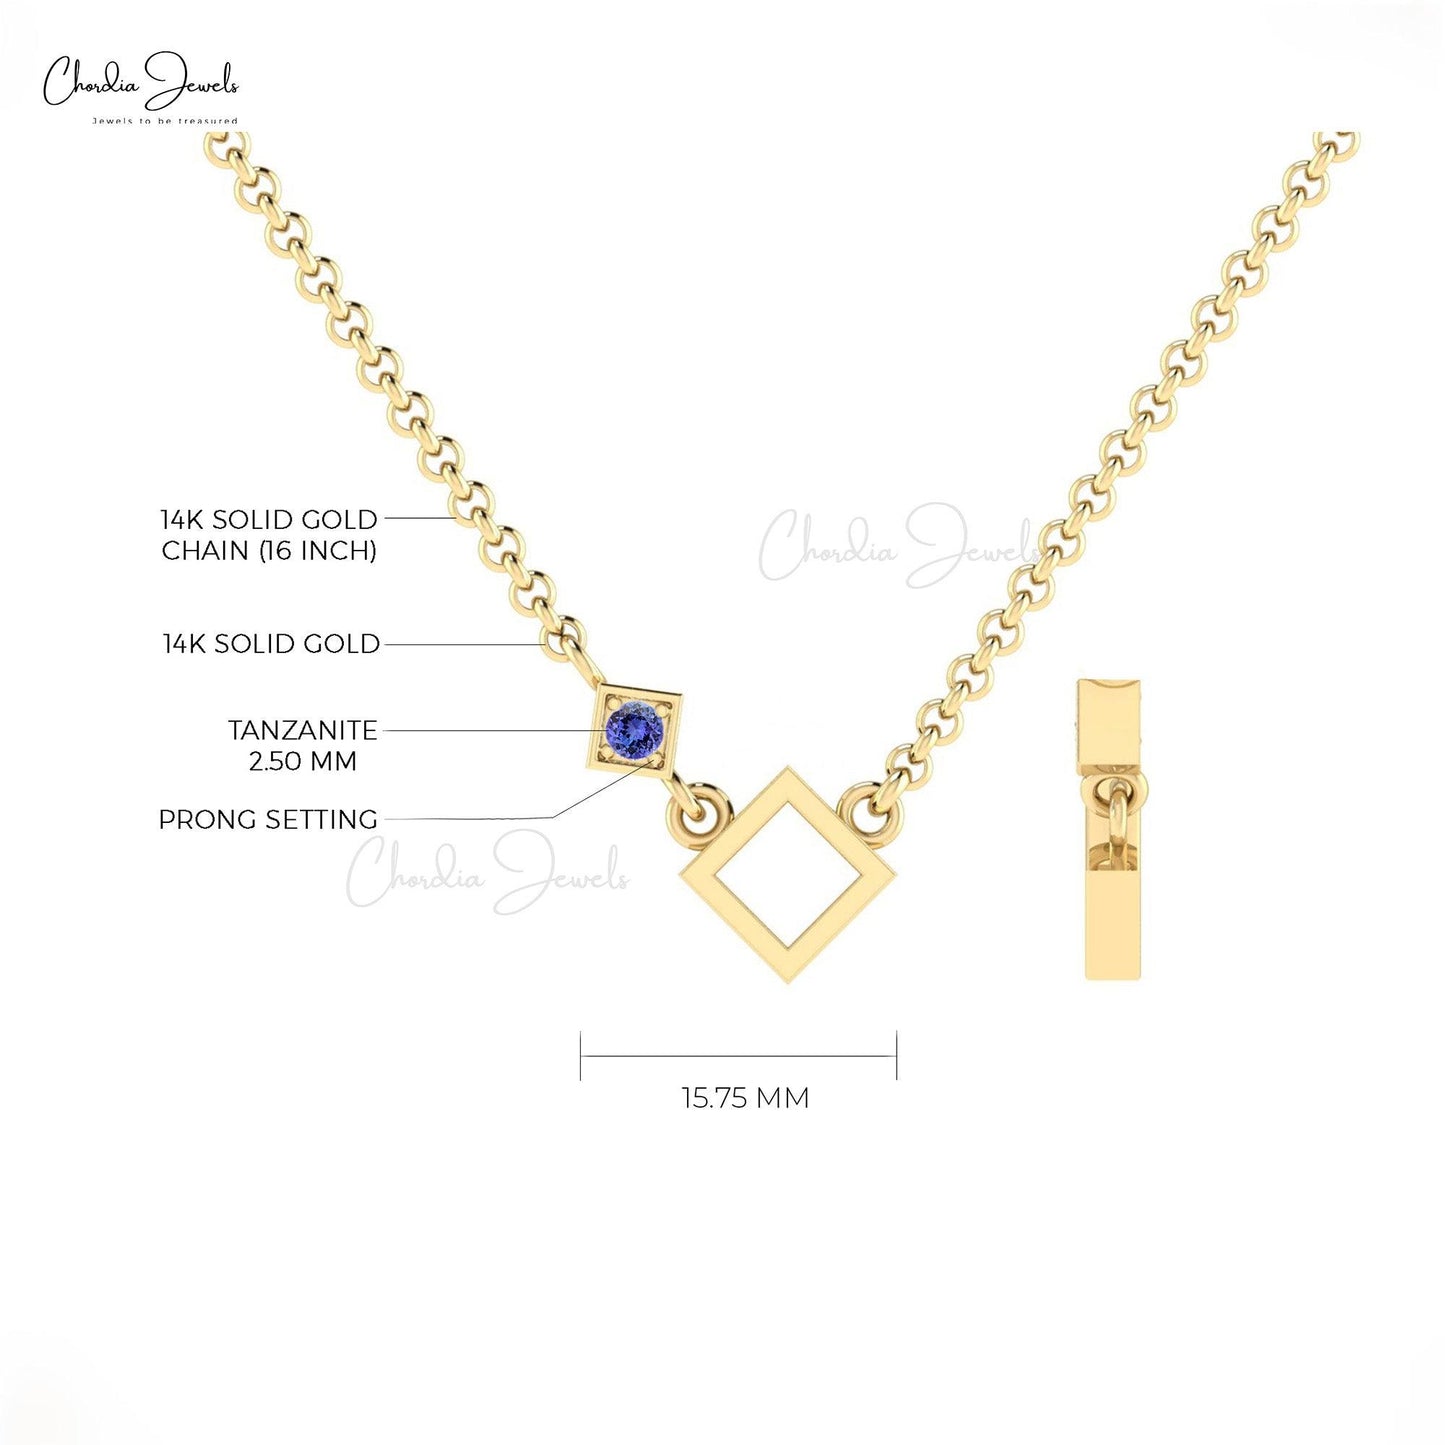 0.08 Ct Round Cut Gemstone Necklace, Genuine Tanzanite Necklace, 14K Real Gold Open Square Necklace, Lite Weight Jewelry For Anniversary Gift - Chordia Jewels